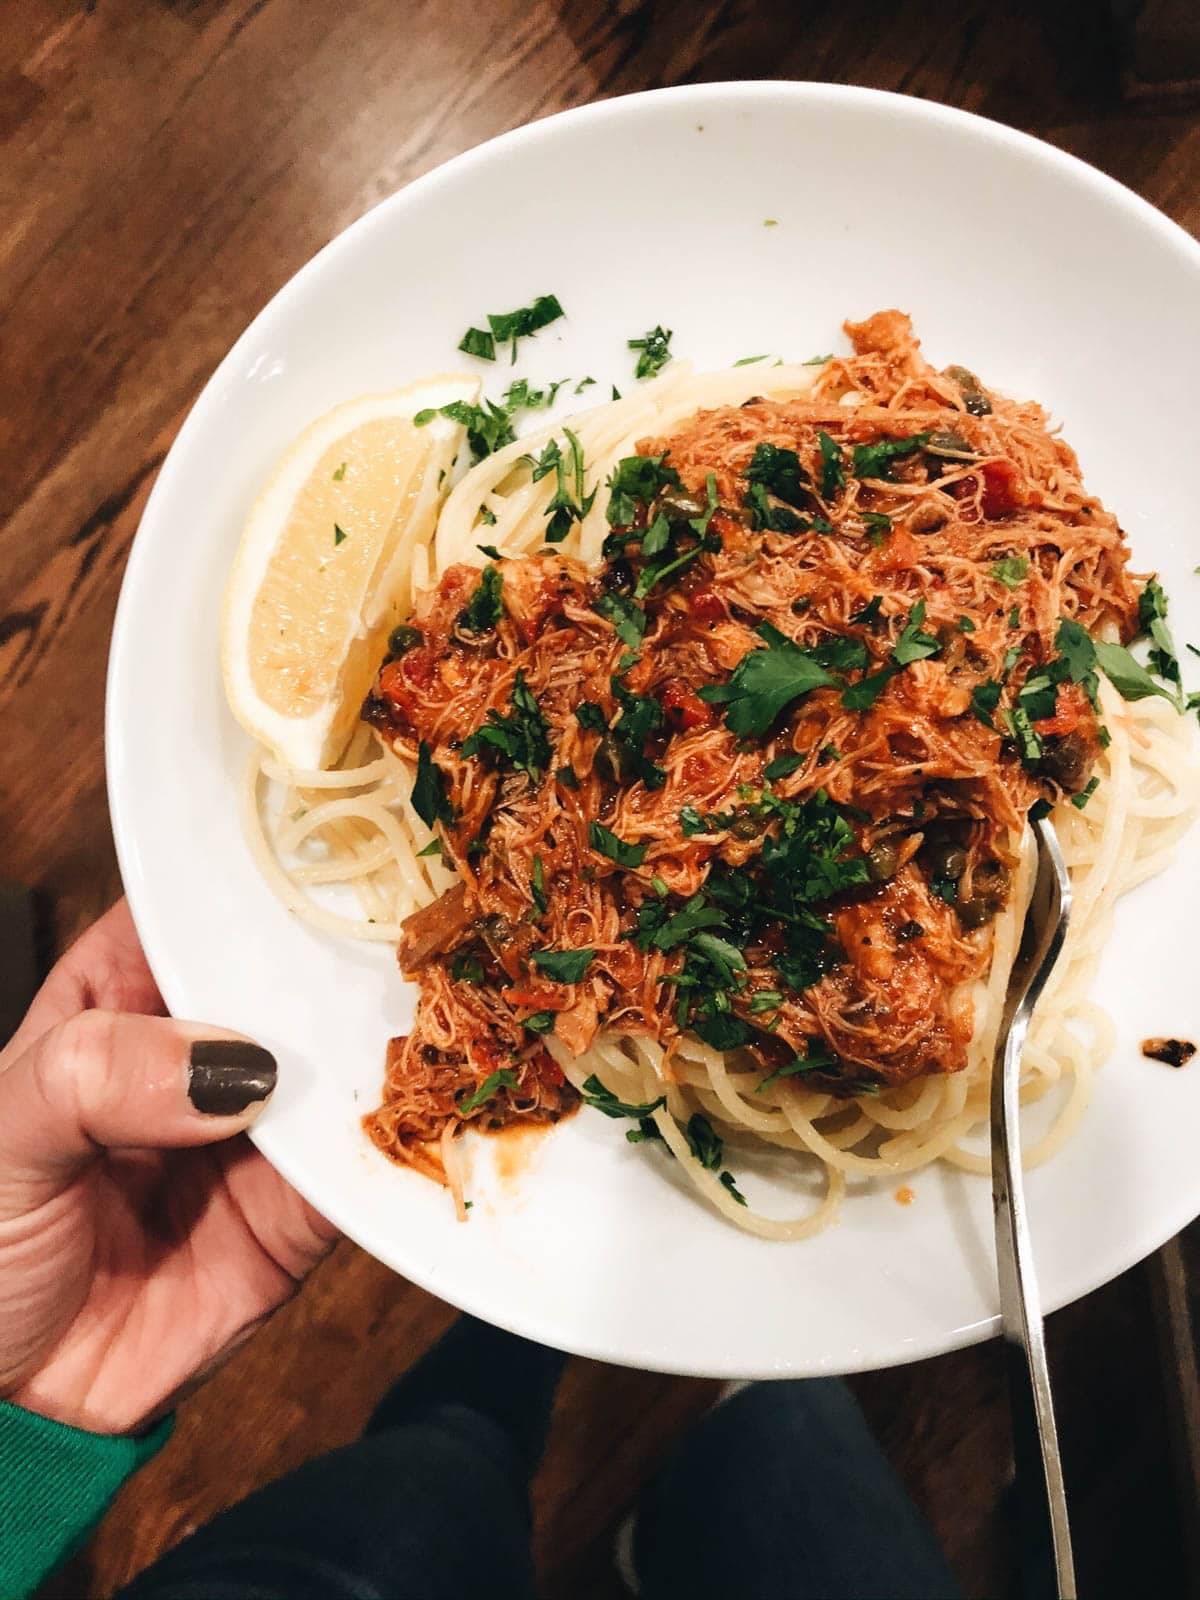 A big white bowl of spaghetti with a shredded chicken tomato sauce, topped with herbs and a lemon wedge.